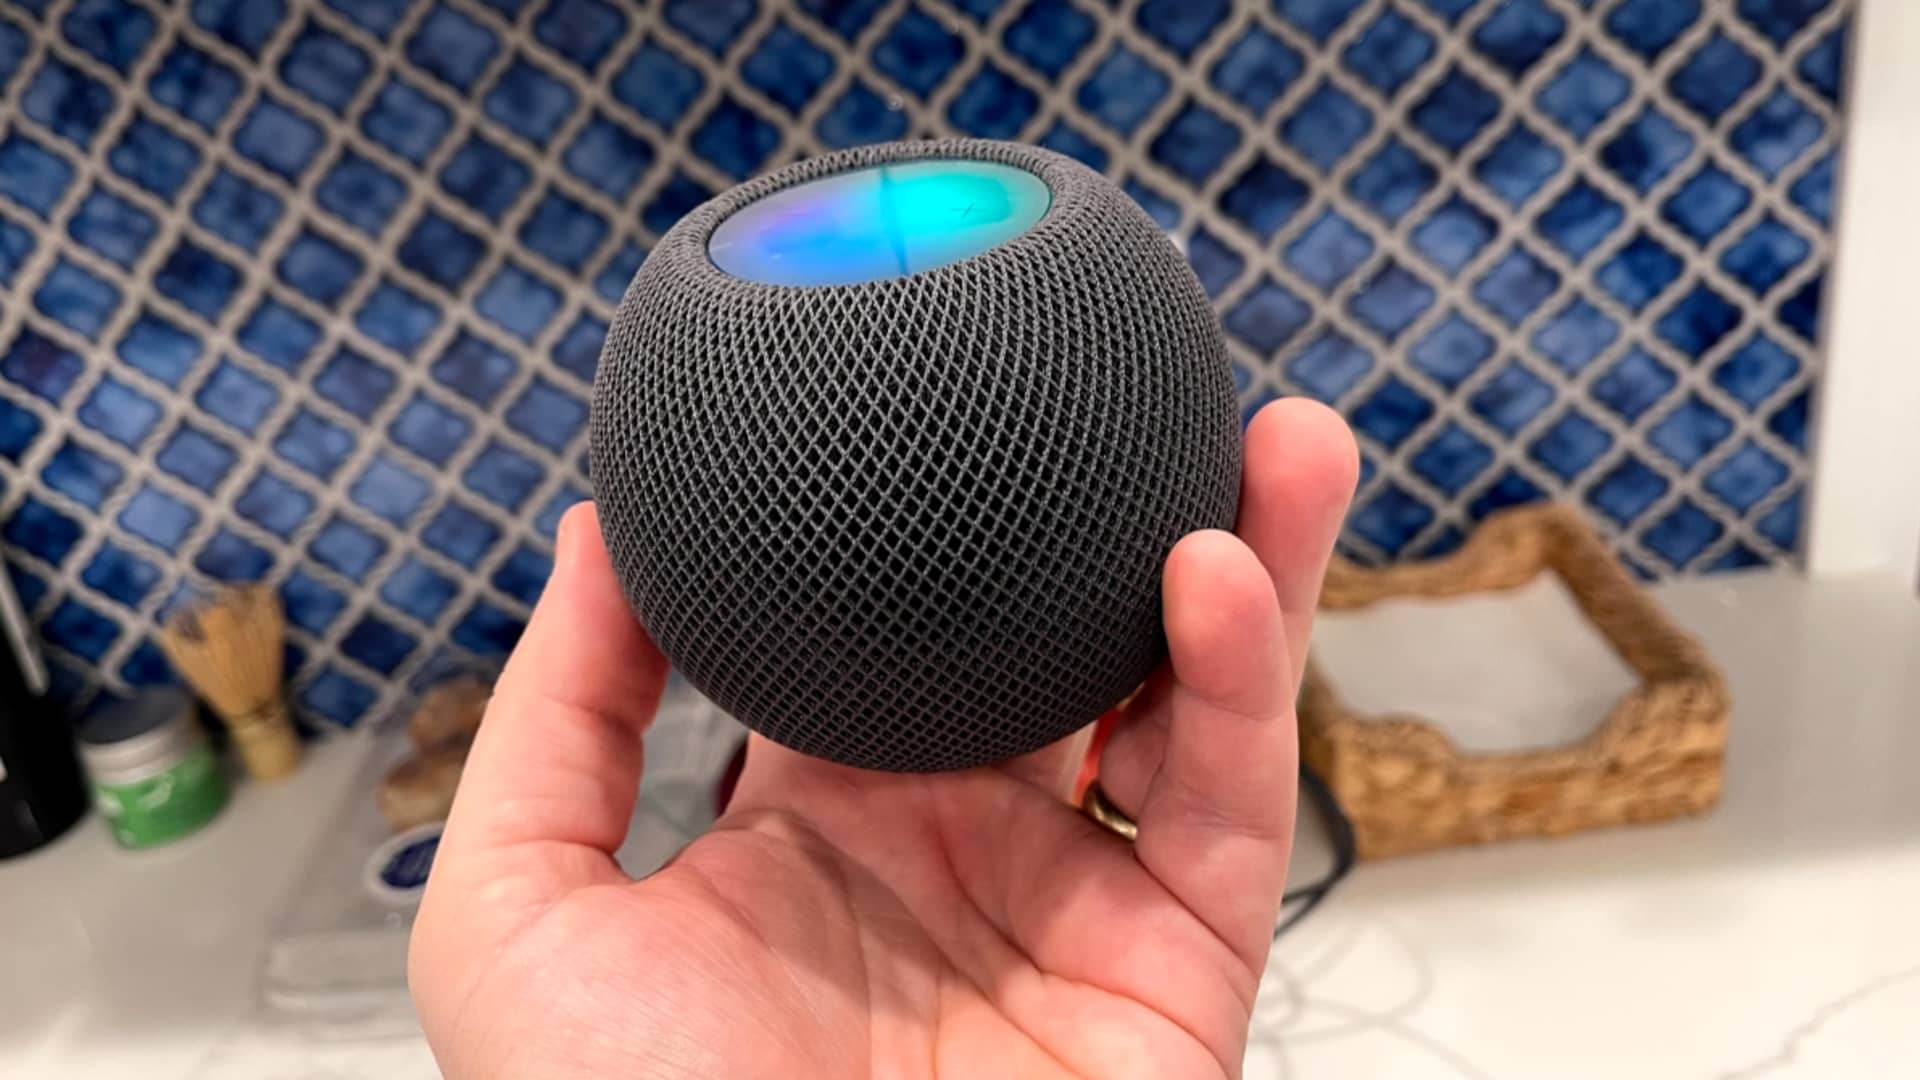 Apple's HomePod Mini is good if you have an iPhone but the $99 Amazon Echo sounds better